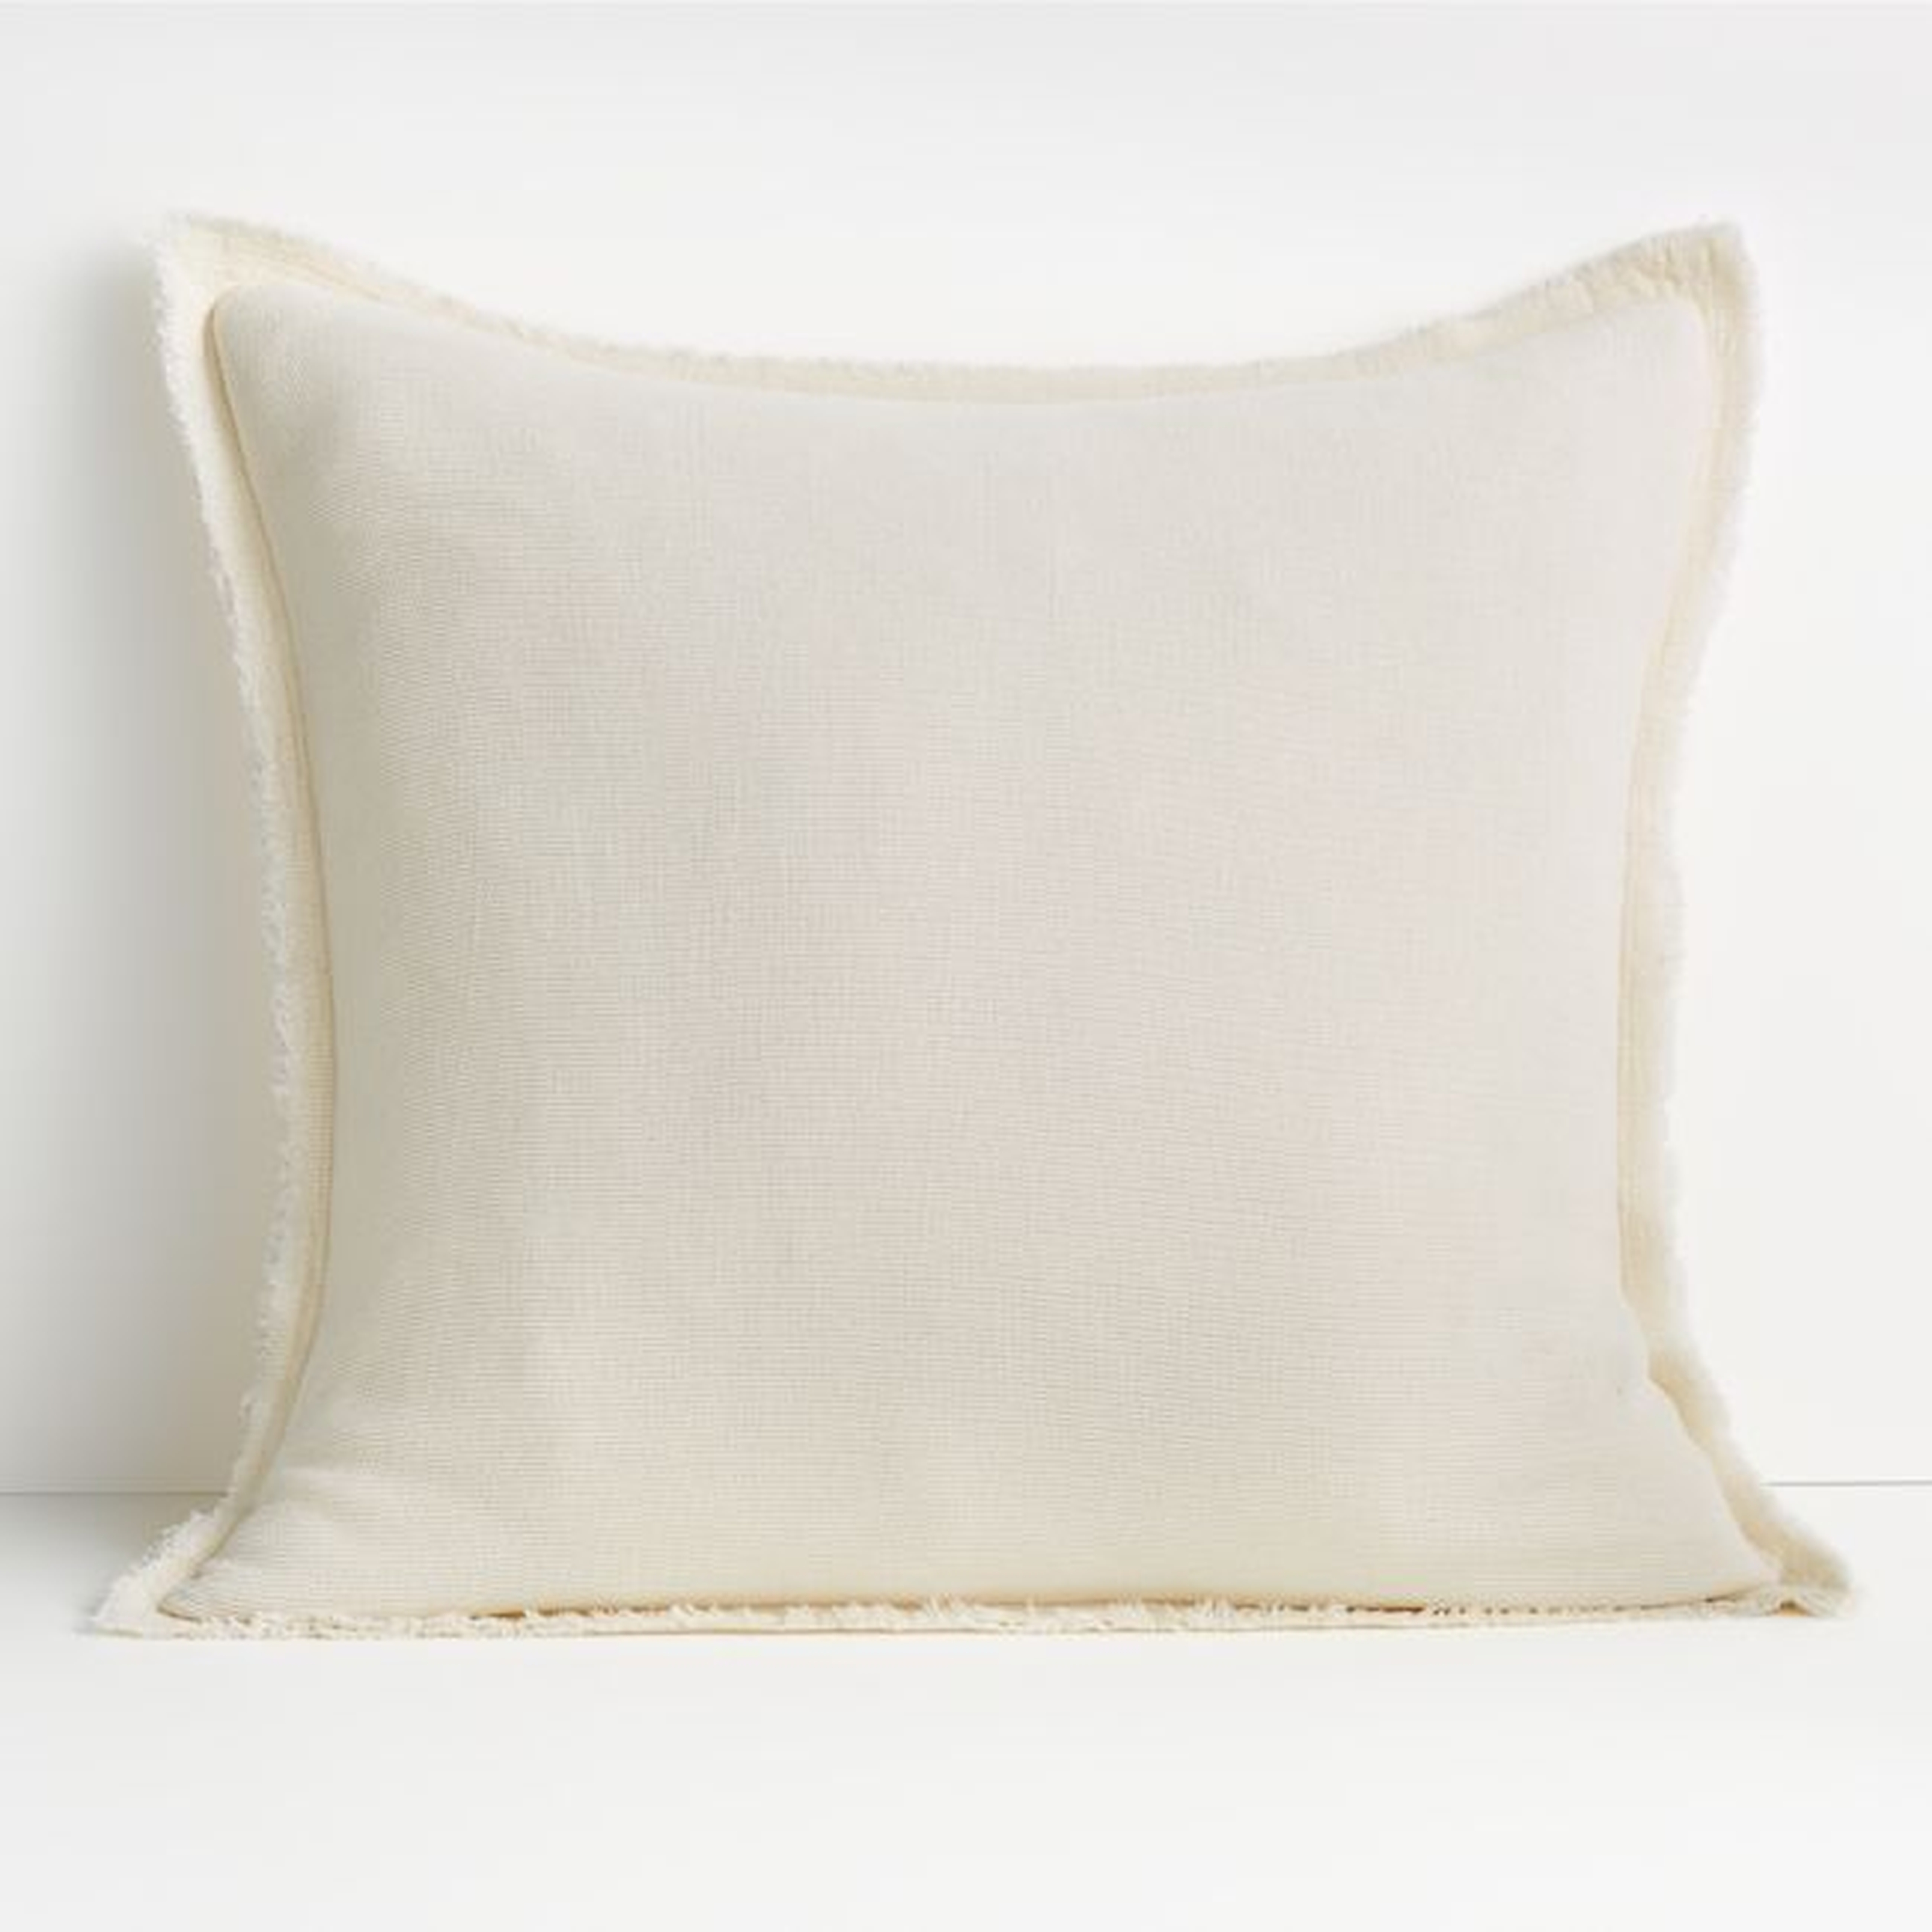 Olind Pillow, Cream, 23" x 23" - Crate and Barrel